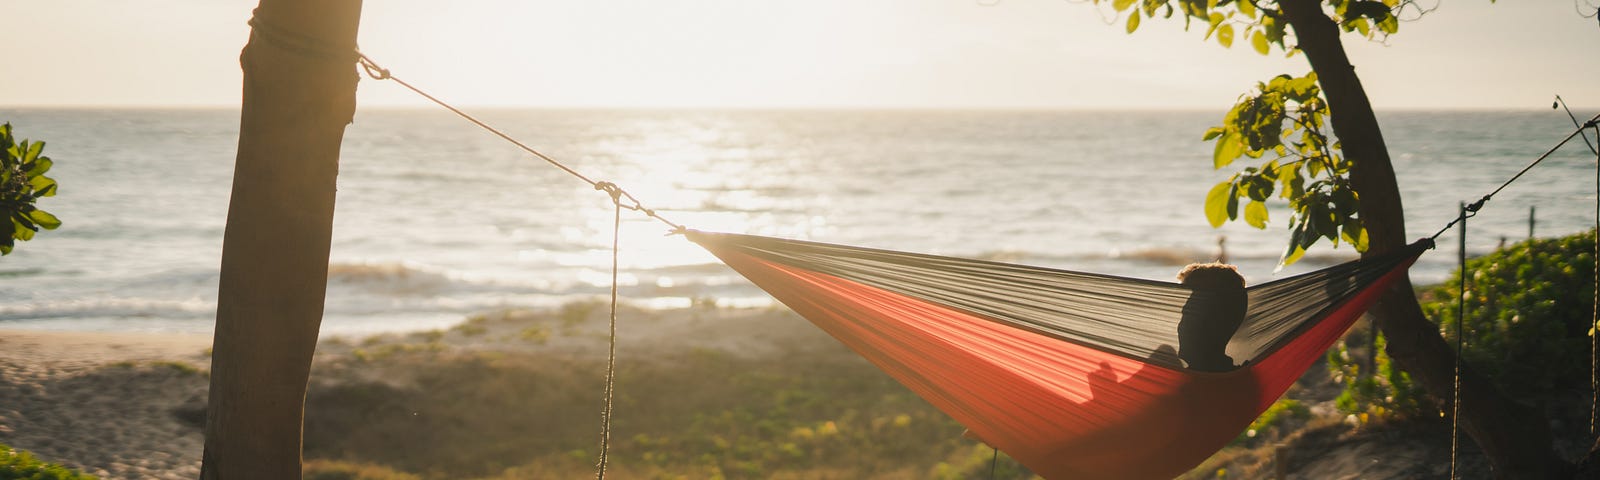 A person in a hammock with the sea in the background.